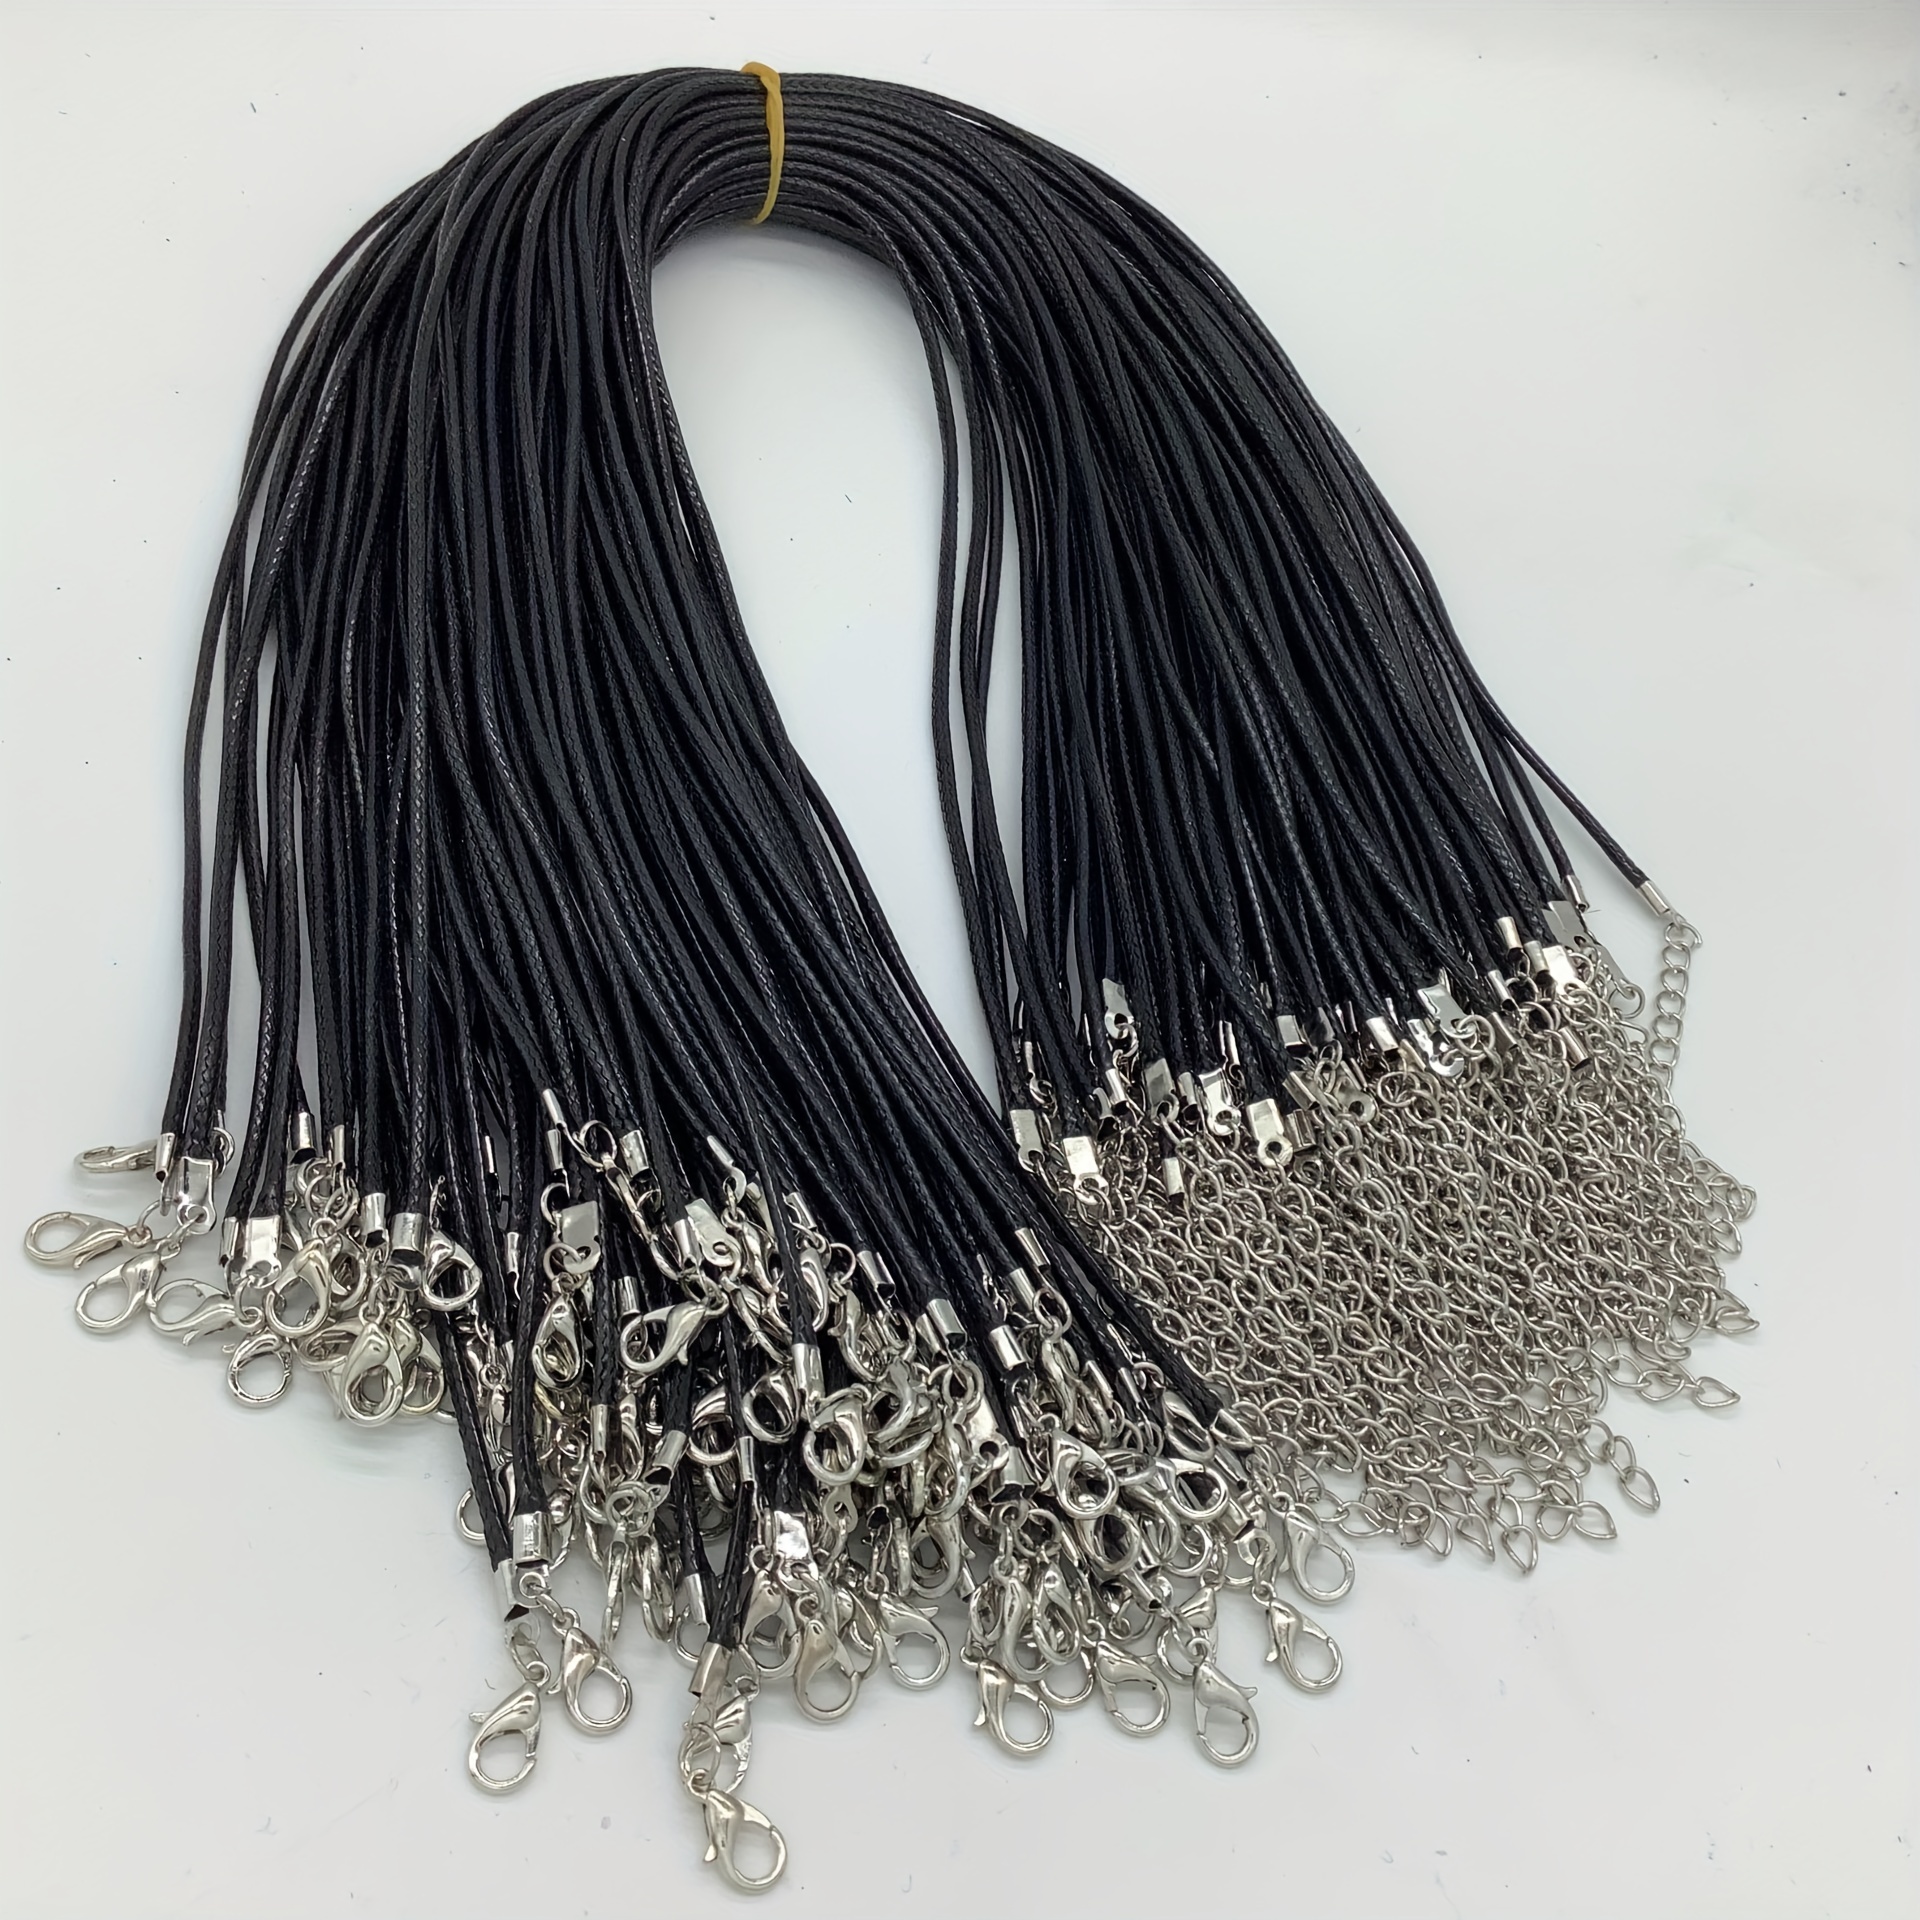 5pcs 1.5mm Waxed Necklace Cord With Various Pendants & Pu Leather